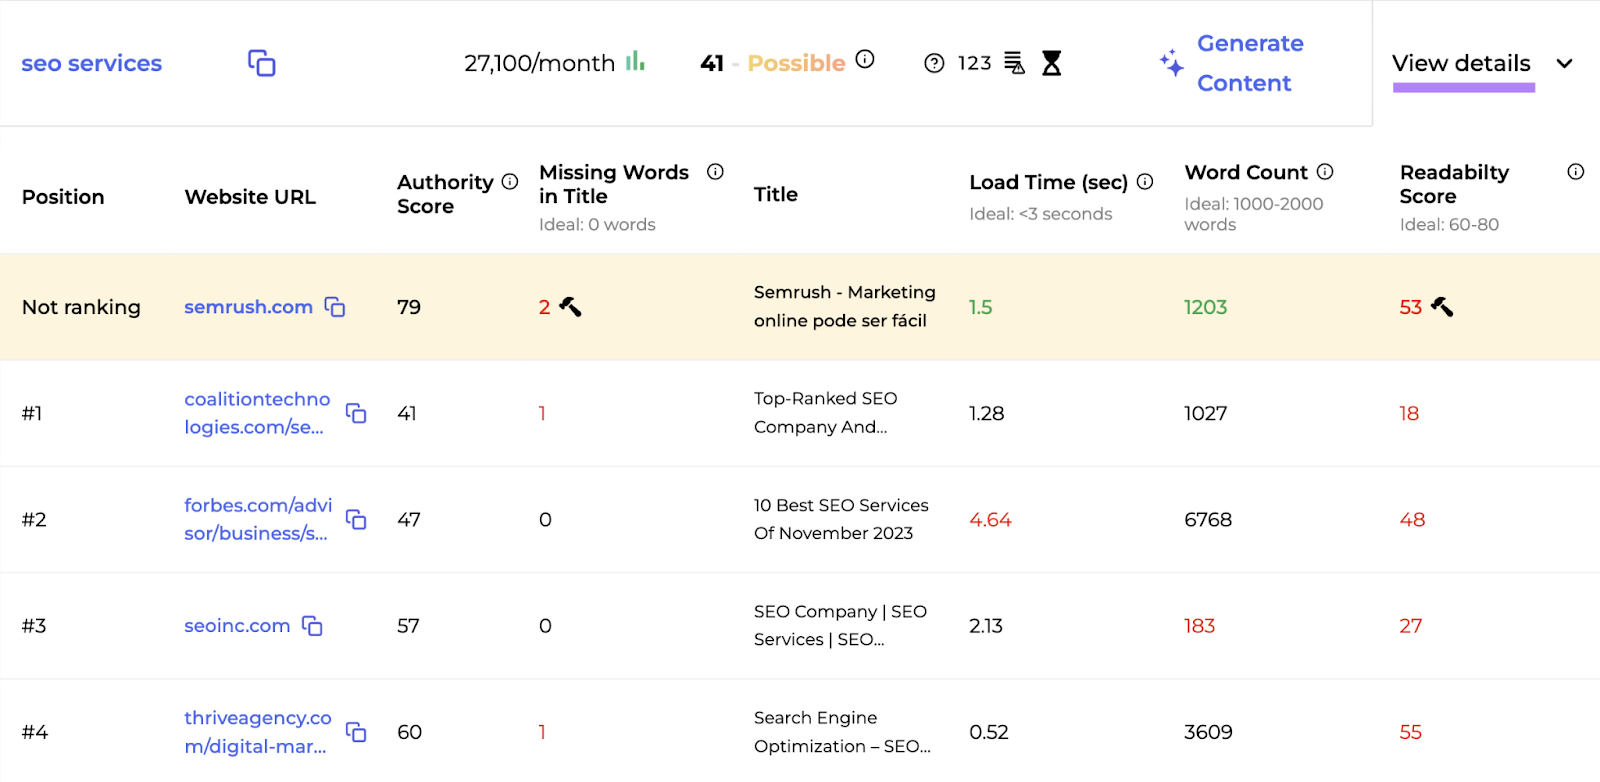 SERP Gap Analyzer app helps you find weaknesses in the top-ranking content